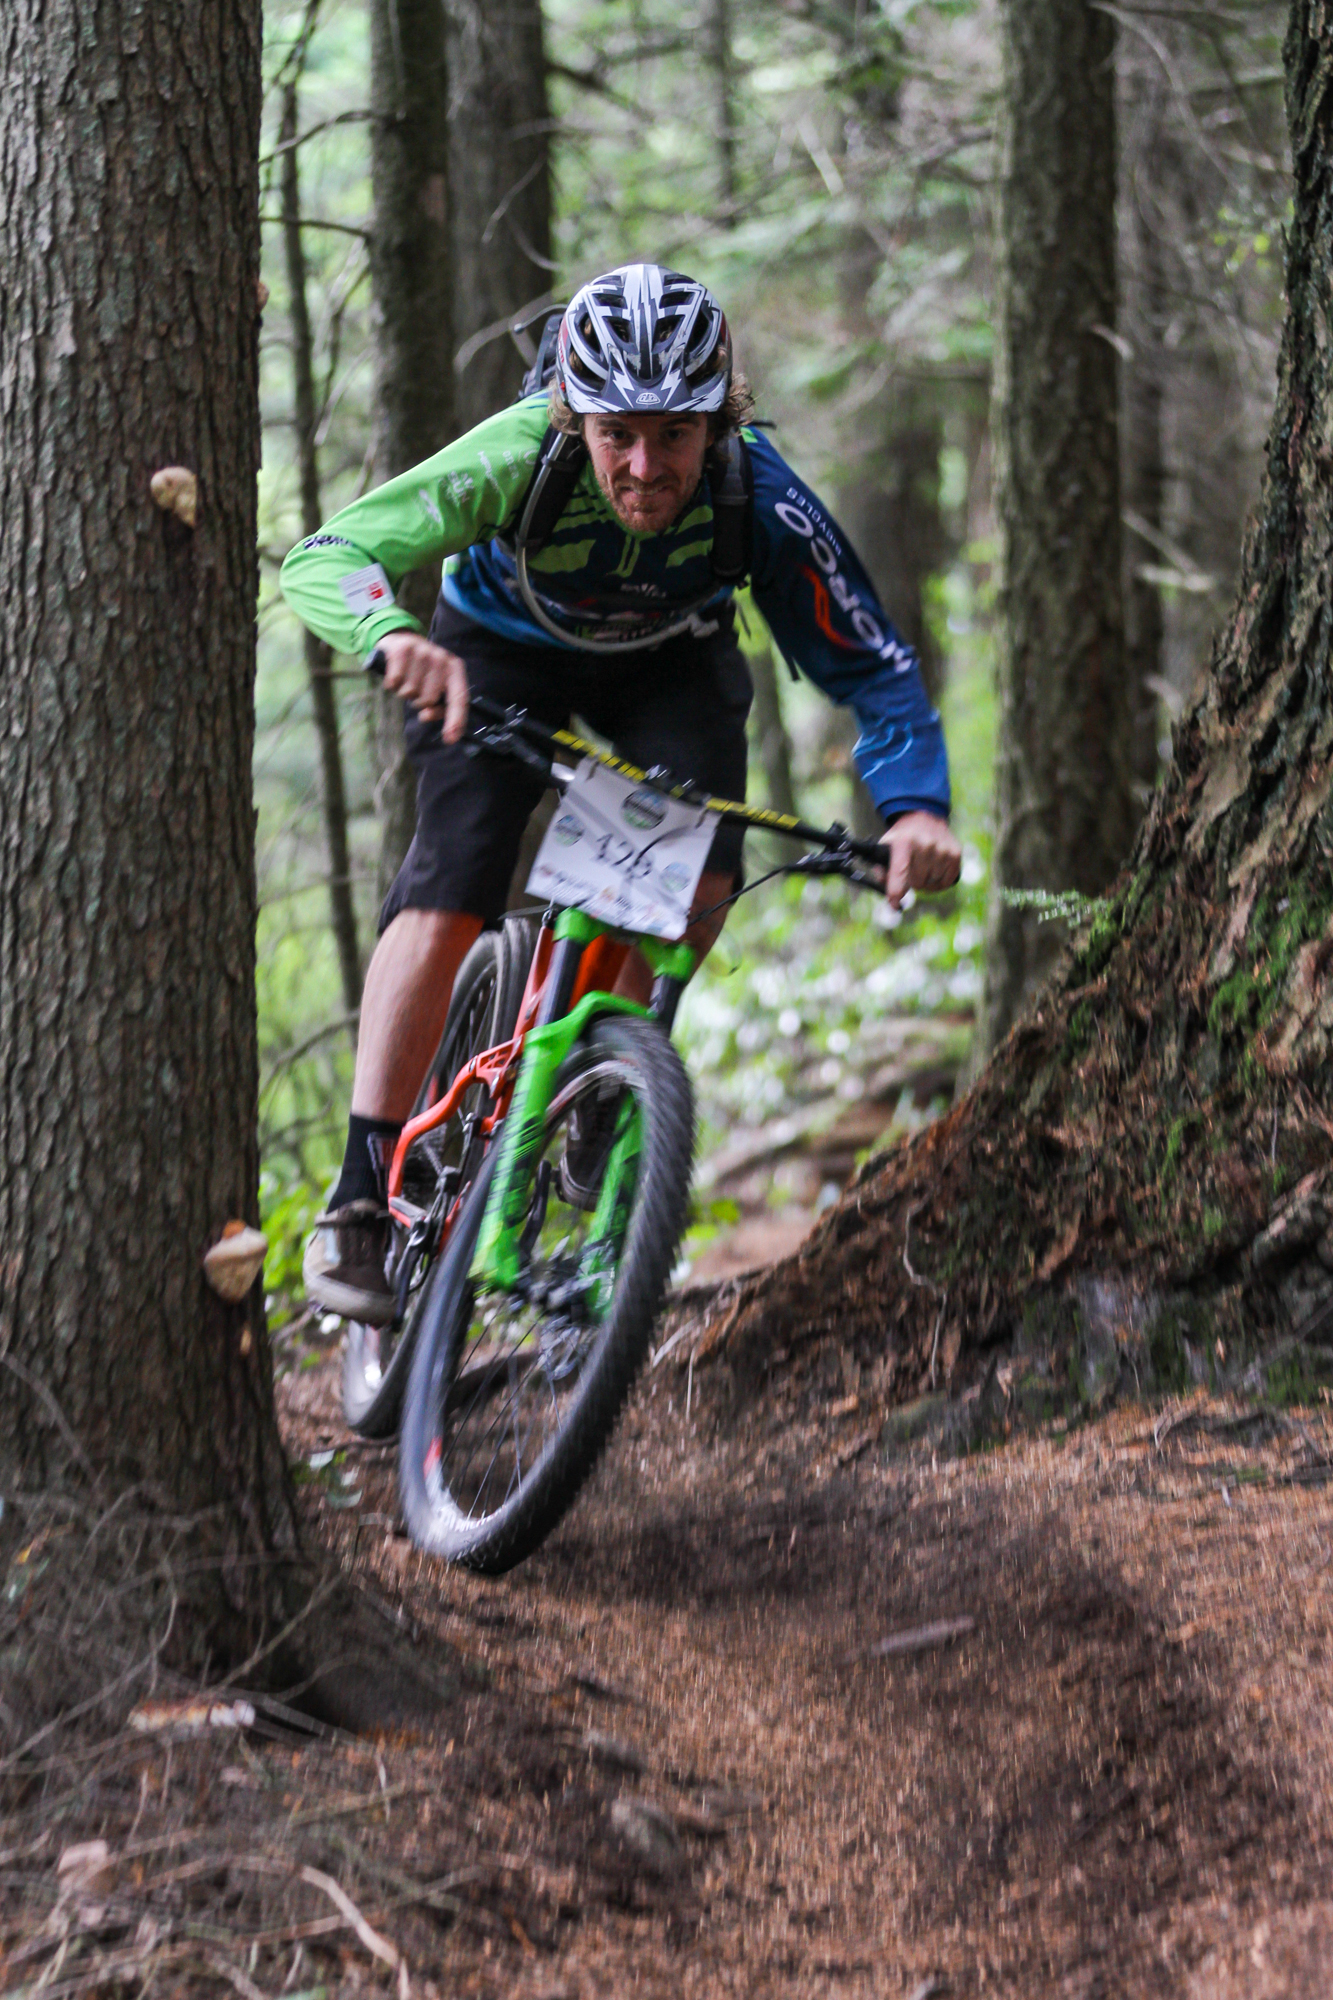   A mountain biker rides through trees during stage two of the Enduro of Subdued Excitement at Larrabee State Park, in Bellingham, Wash., on Saturday, Oct. 17, 2015.  